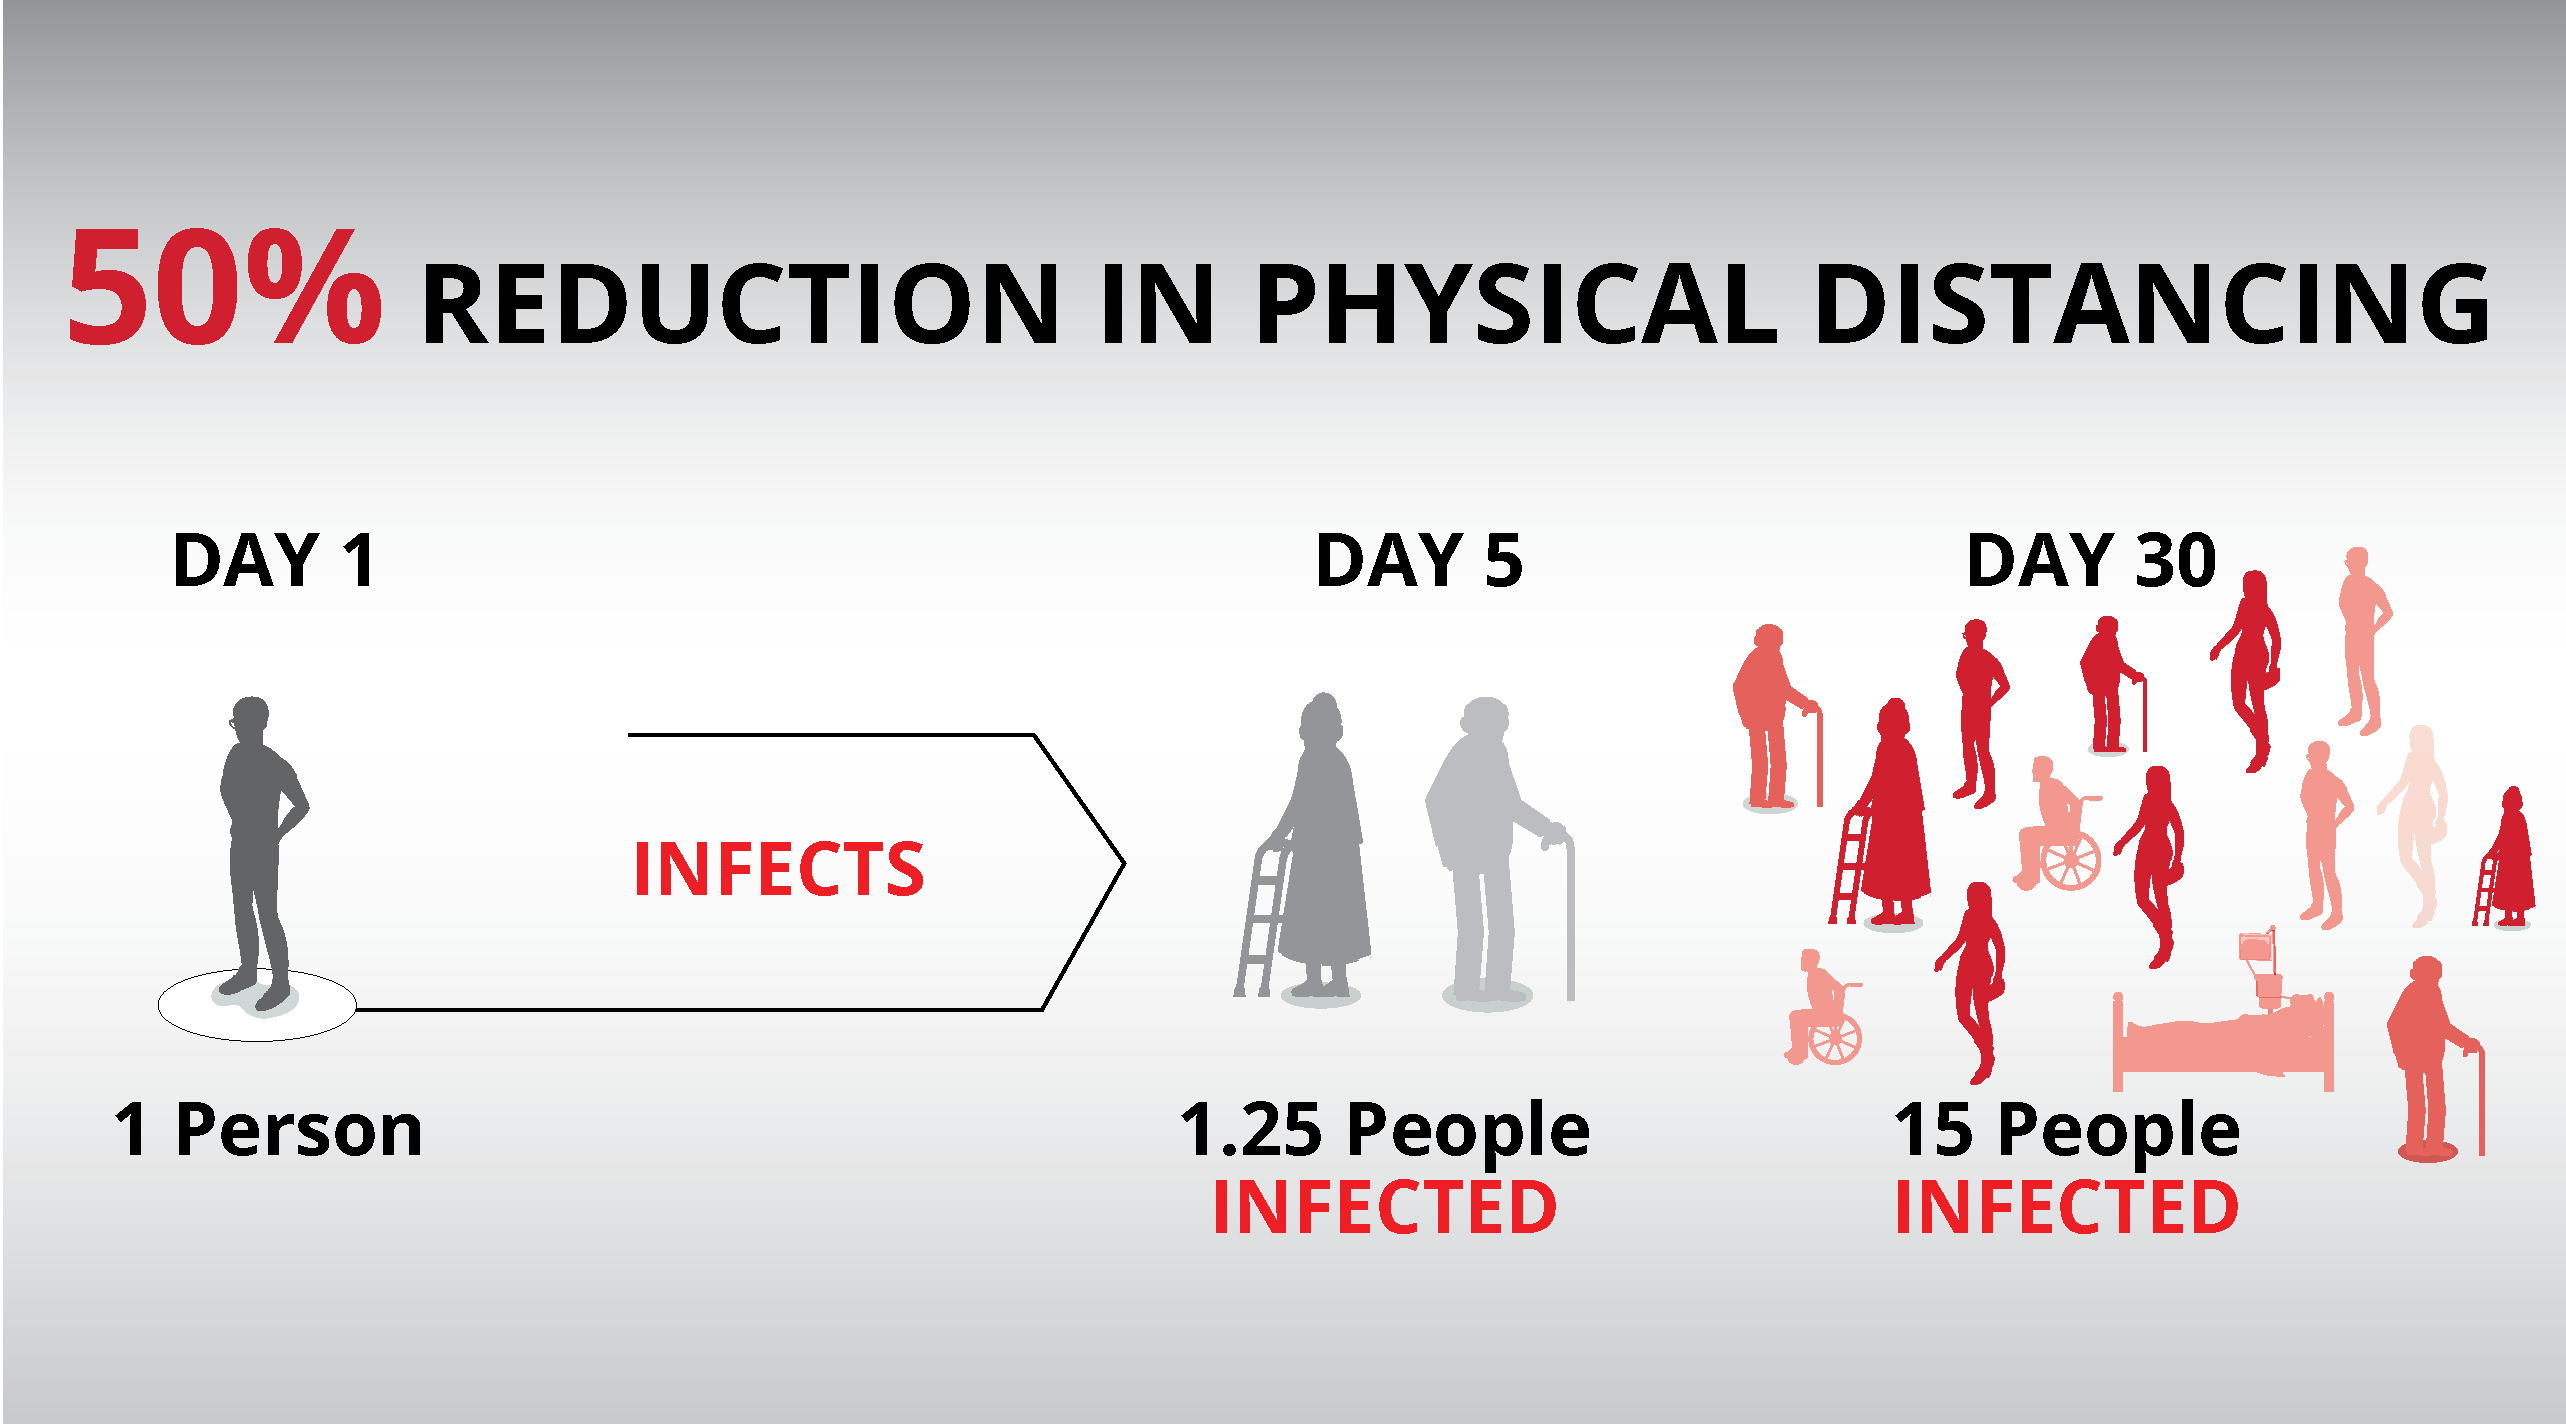 50% reduction in physical distanicng. One person infects 1.25 people on day 5 and 15 people on day 30